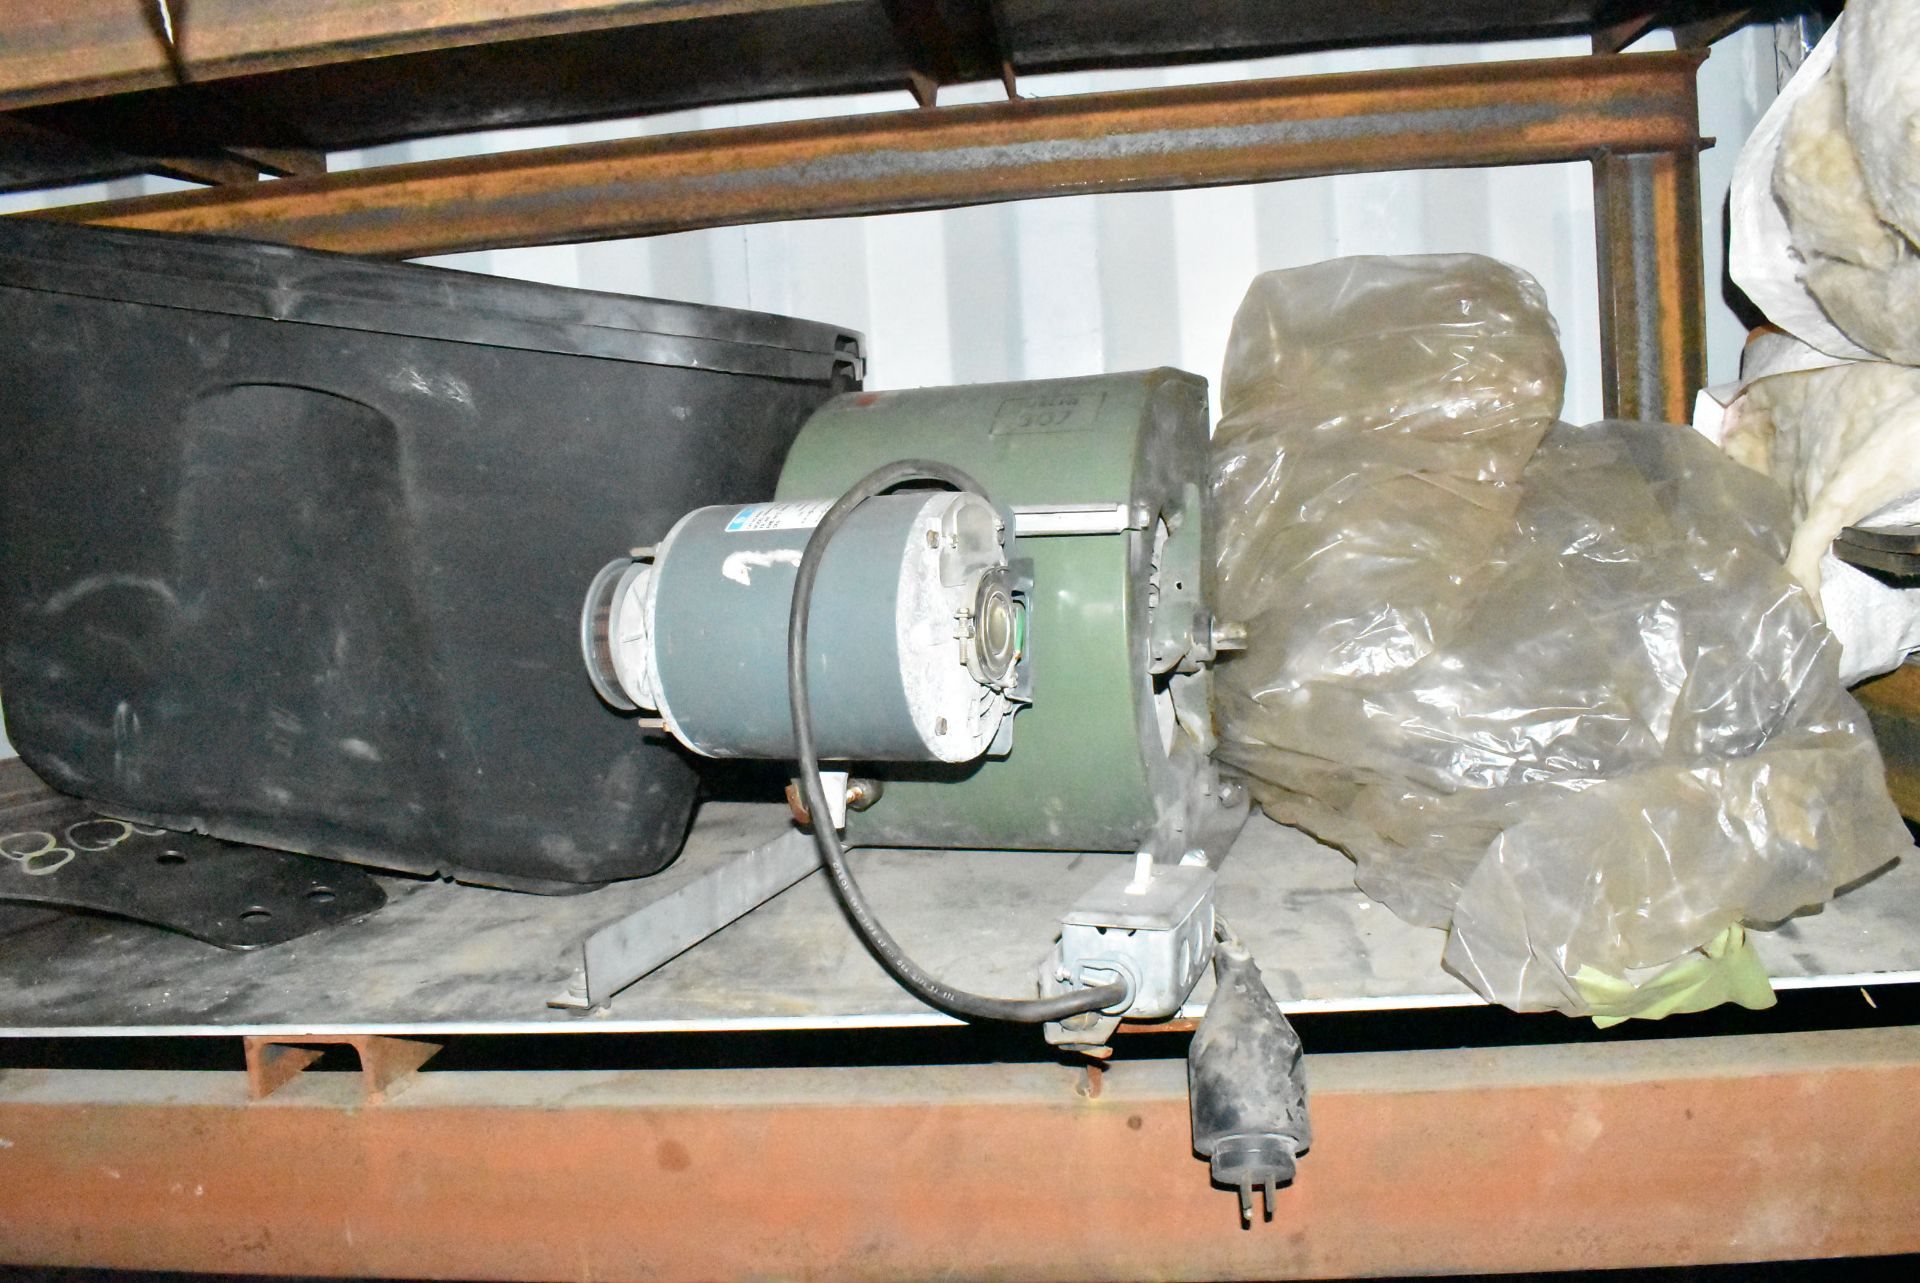 LOT/ REMAINING CONTENTS OF CONTAINER CONSISTING OF SPARE PARTS, FLY WHEELS, WIRE, ROLLERS AND BUCKET - Image 4 of 8